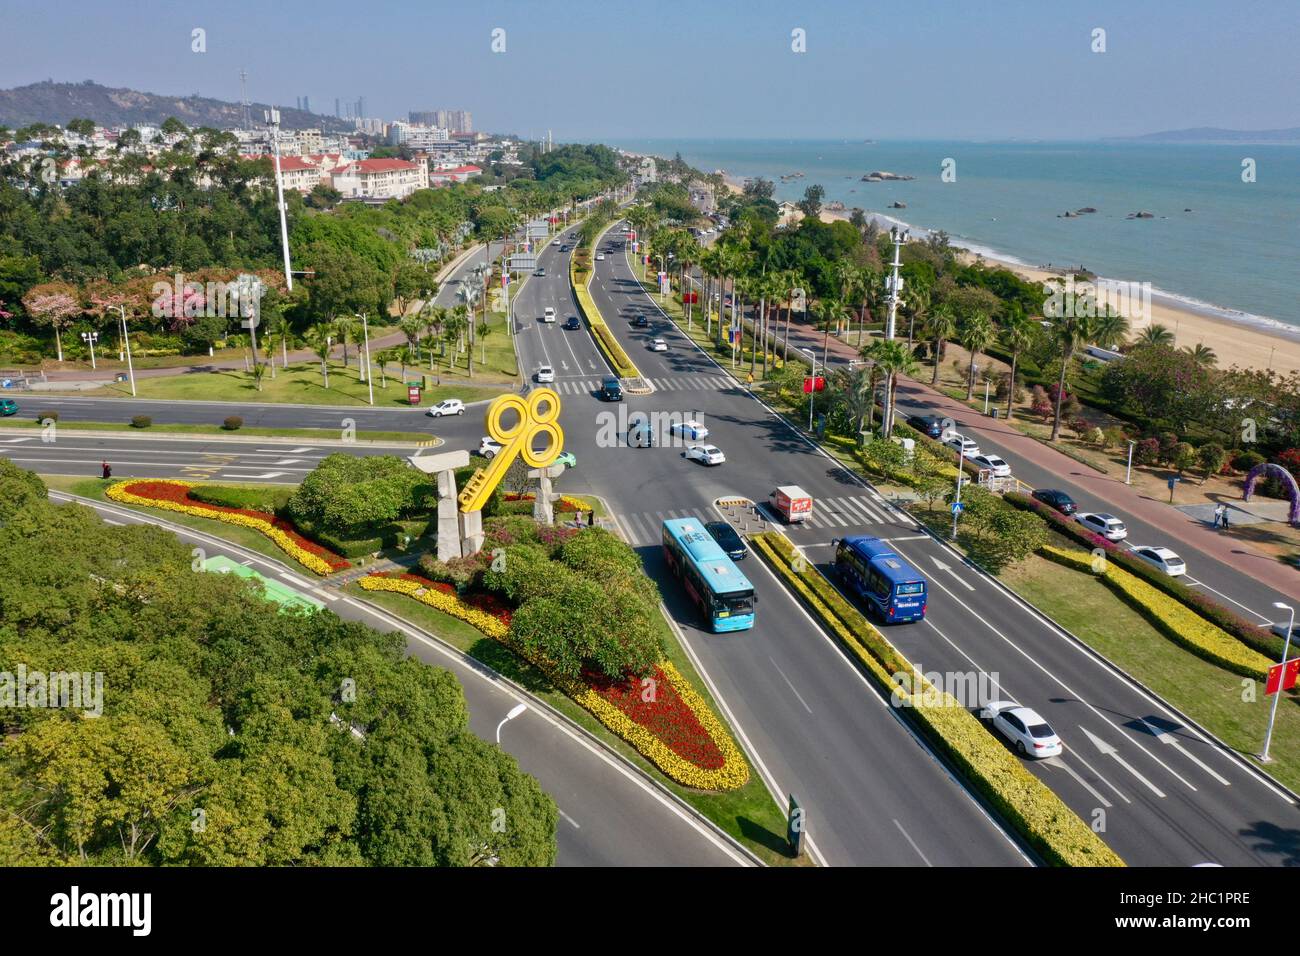 (211221) -- XIAMEN, Dec. 21, 2021 (Xinhua) -- Aerial photo taken on Dec. 12, 2021 shows the sculpture of a symbolic 'golden key' for the China International Fair for Investment and Trade in Xiamen, southeast China's Fujian Province. This year marks the 40th anniversary of the establishment of the Xiamen Special Economic Zone (SEZ). The Xiamen SEZ has made important contributions to the country's reform, opening up, and socialist modernization, and played a unique role in promoting national reunification. (Xinhua/Jiang Kehong) Stock Photo